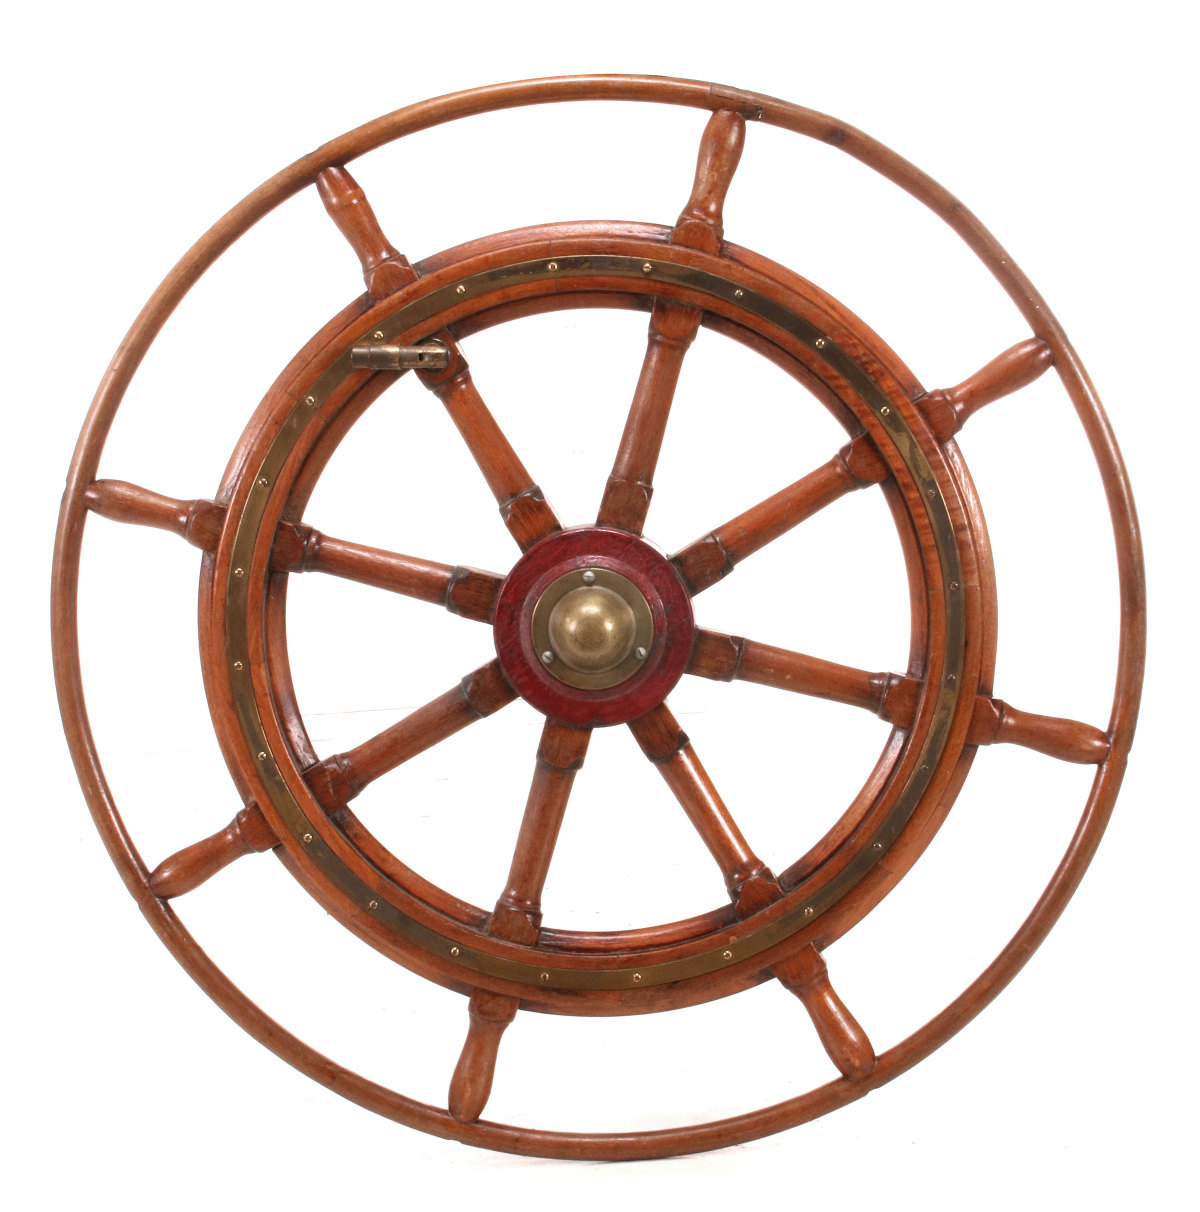 A GOOD 19TH CENTURY OAK SHIP'S WHEEL WITH RED IRON HUB